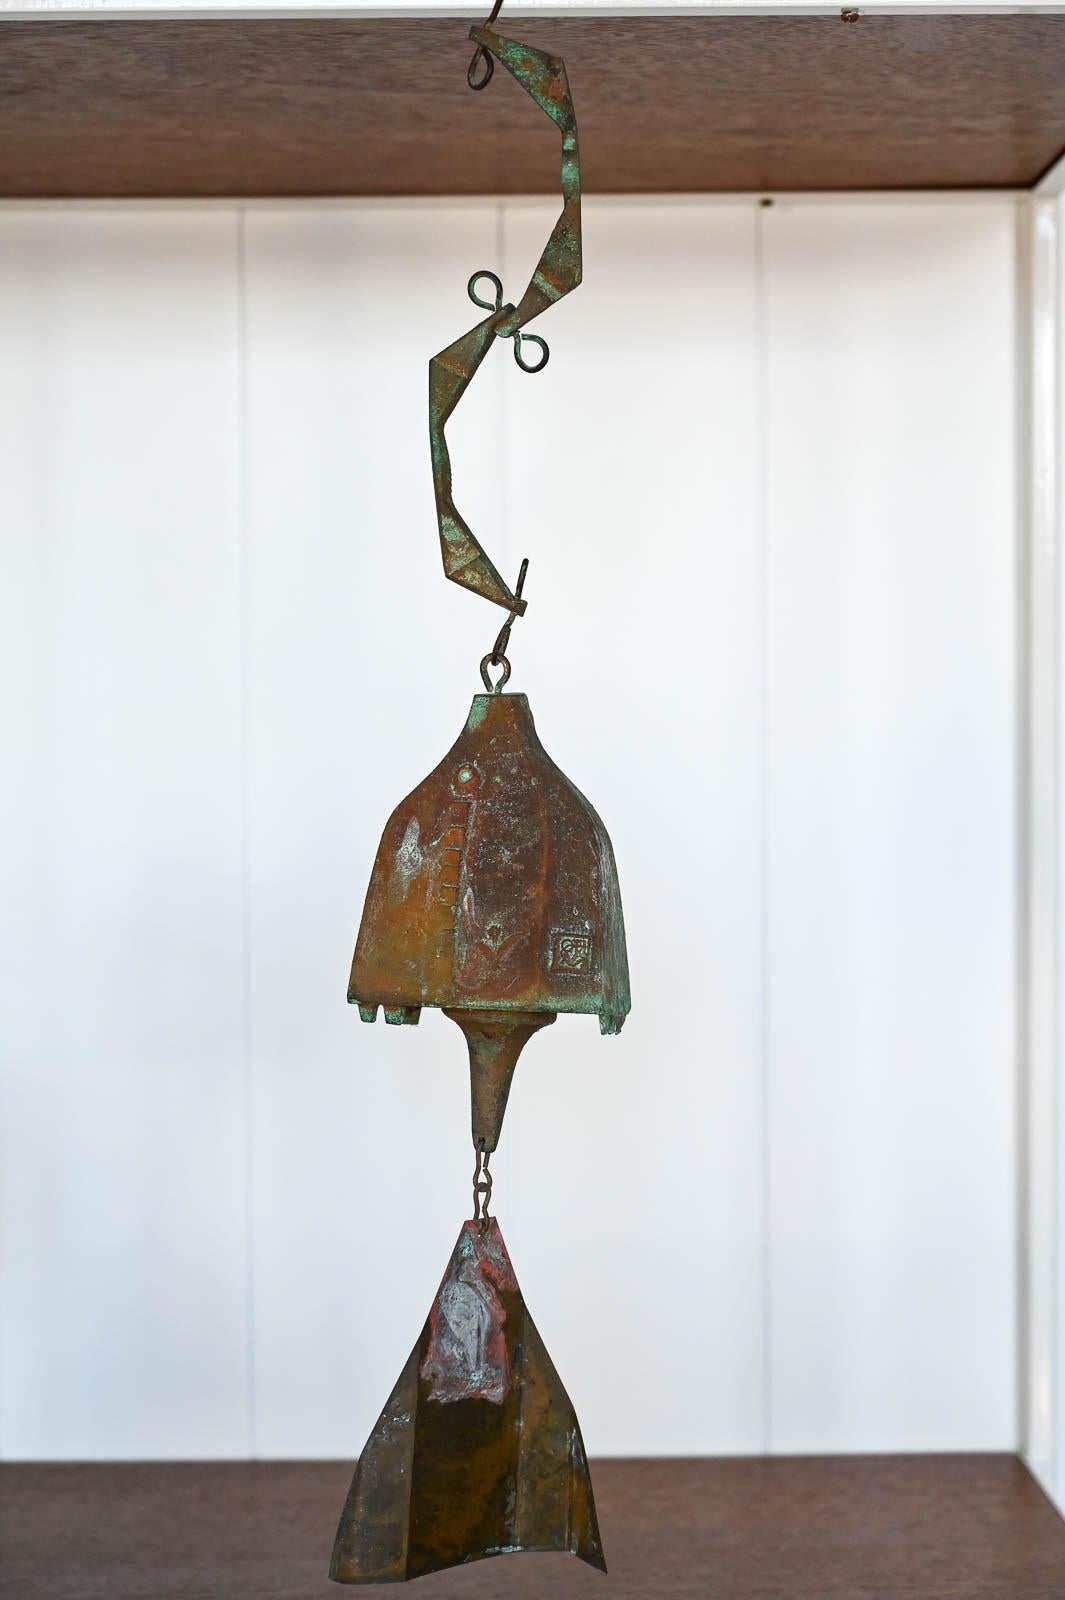 Cast Bronze Windbell by Paolo Soleri, circa 1970. Beautiful early bronze wind bell with original kite and great patina. Makers mark on edge of bell. Heavy, weighs approximate 10 lbs.

Bell measures 5